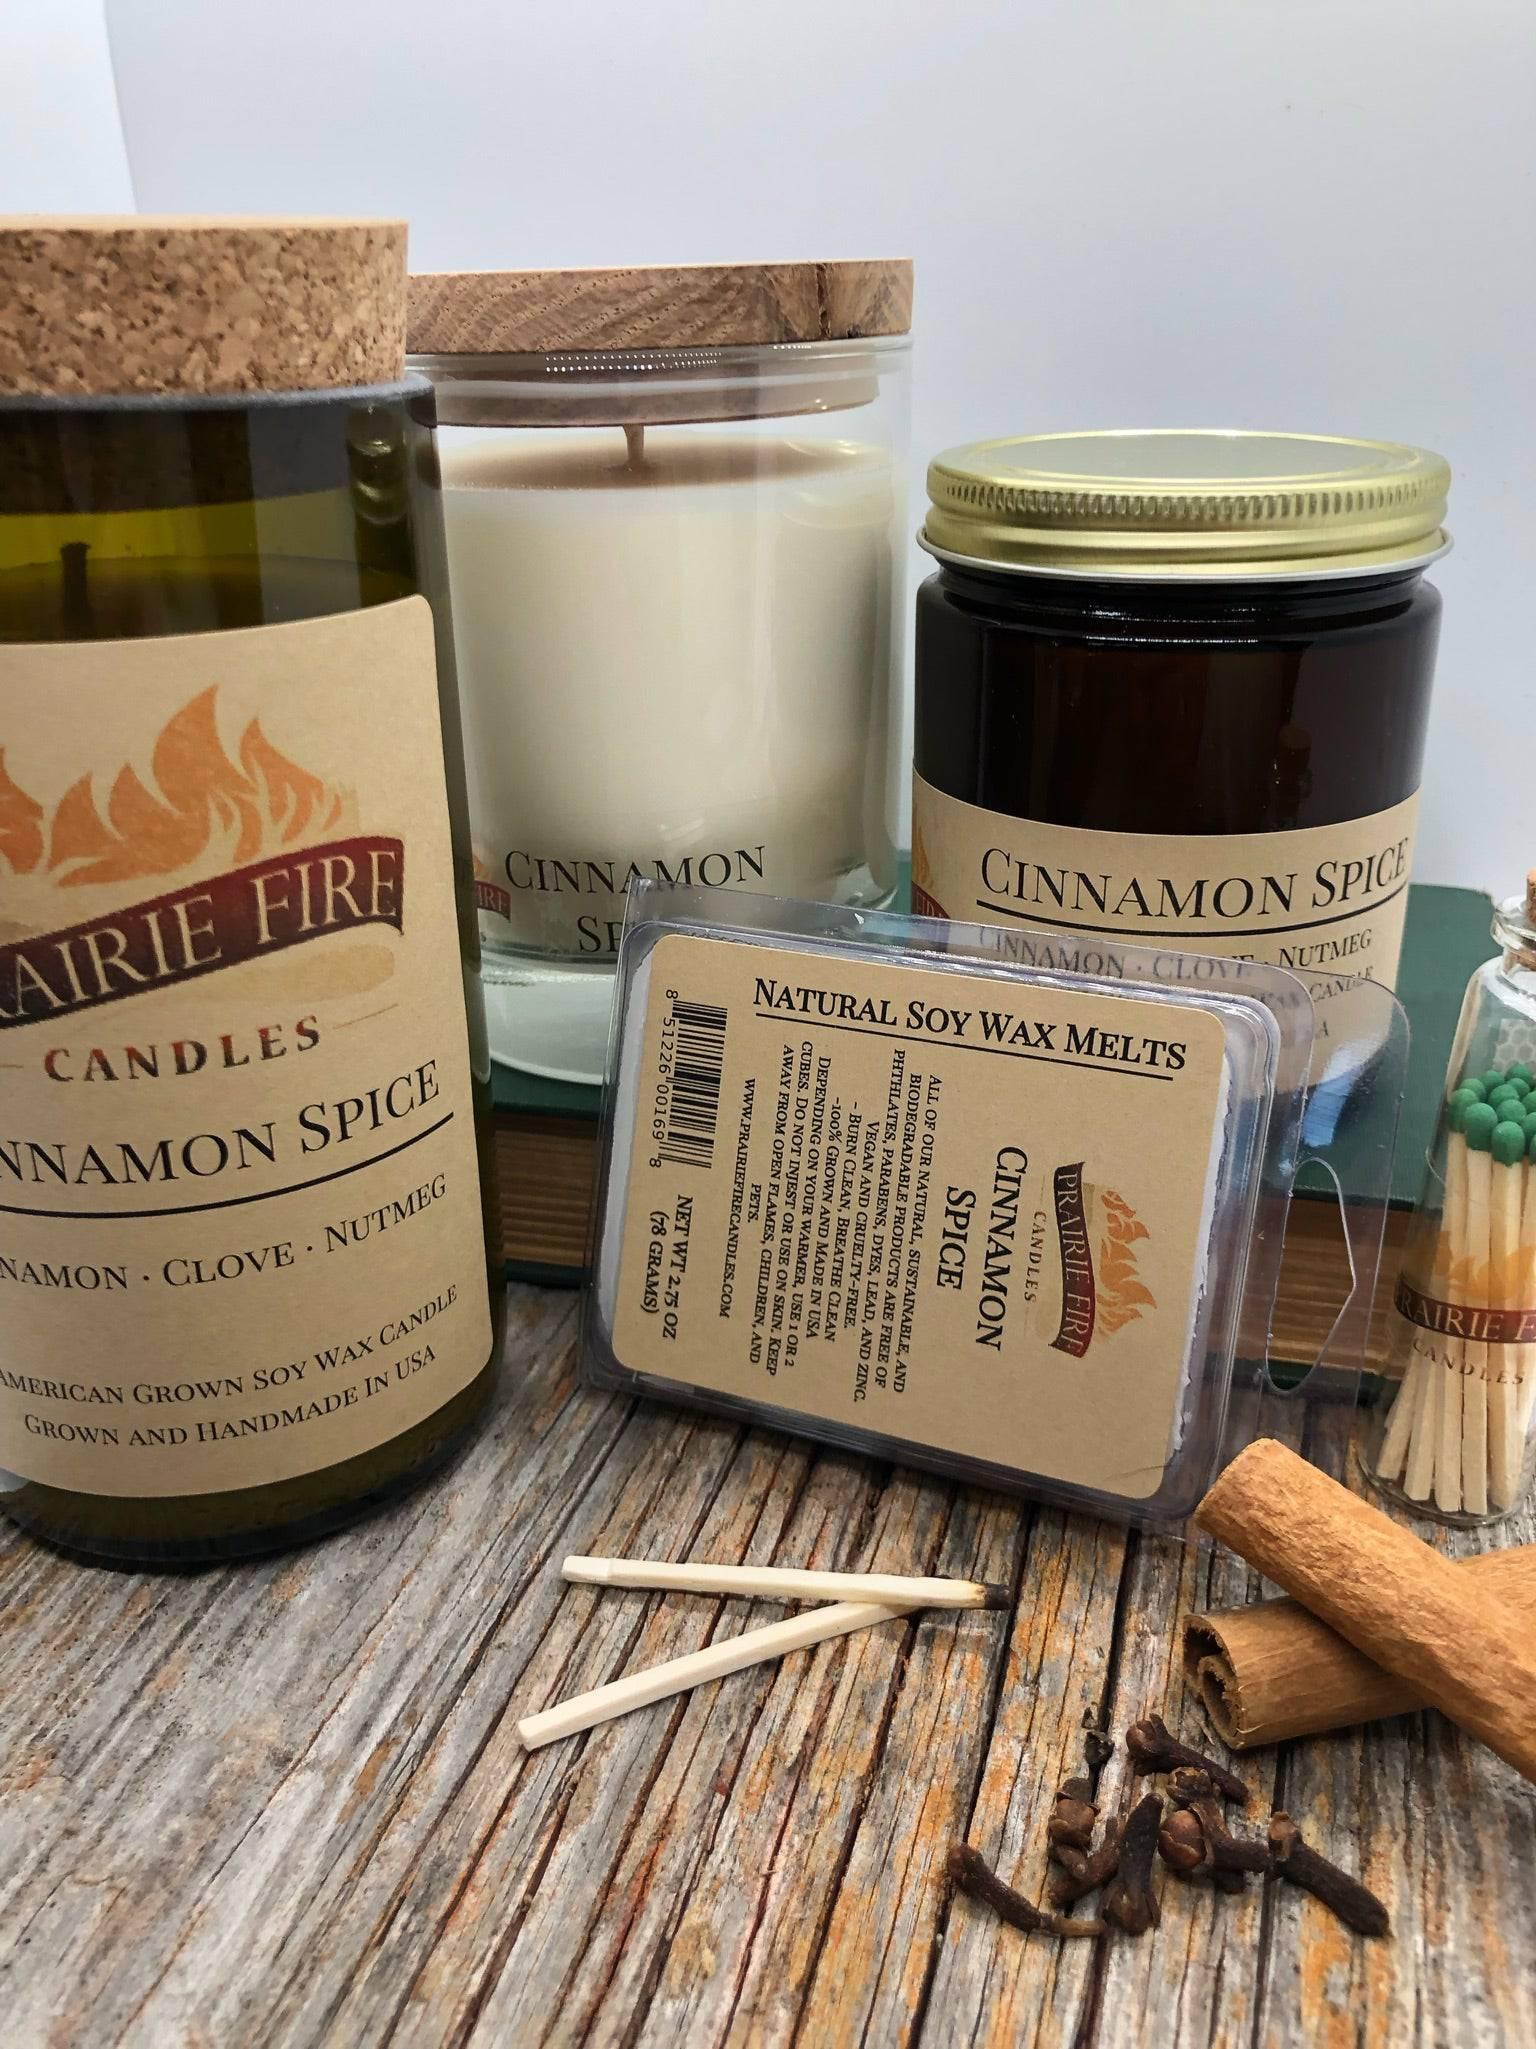 Cinnamon Spice Soy Wax Candle | Repurposed Wine Bottle Candle Natural Cork | Handmade in USA Candle | Eco-Friendly Candle | Non-Toxic Soy Candle - Prairie Fire Candles